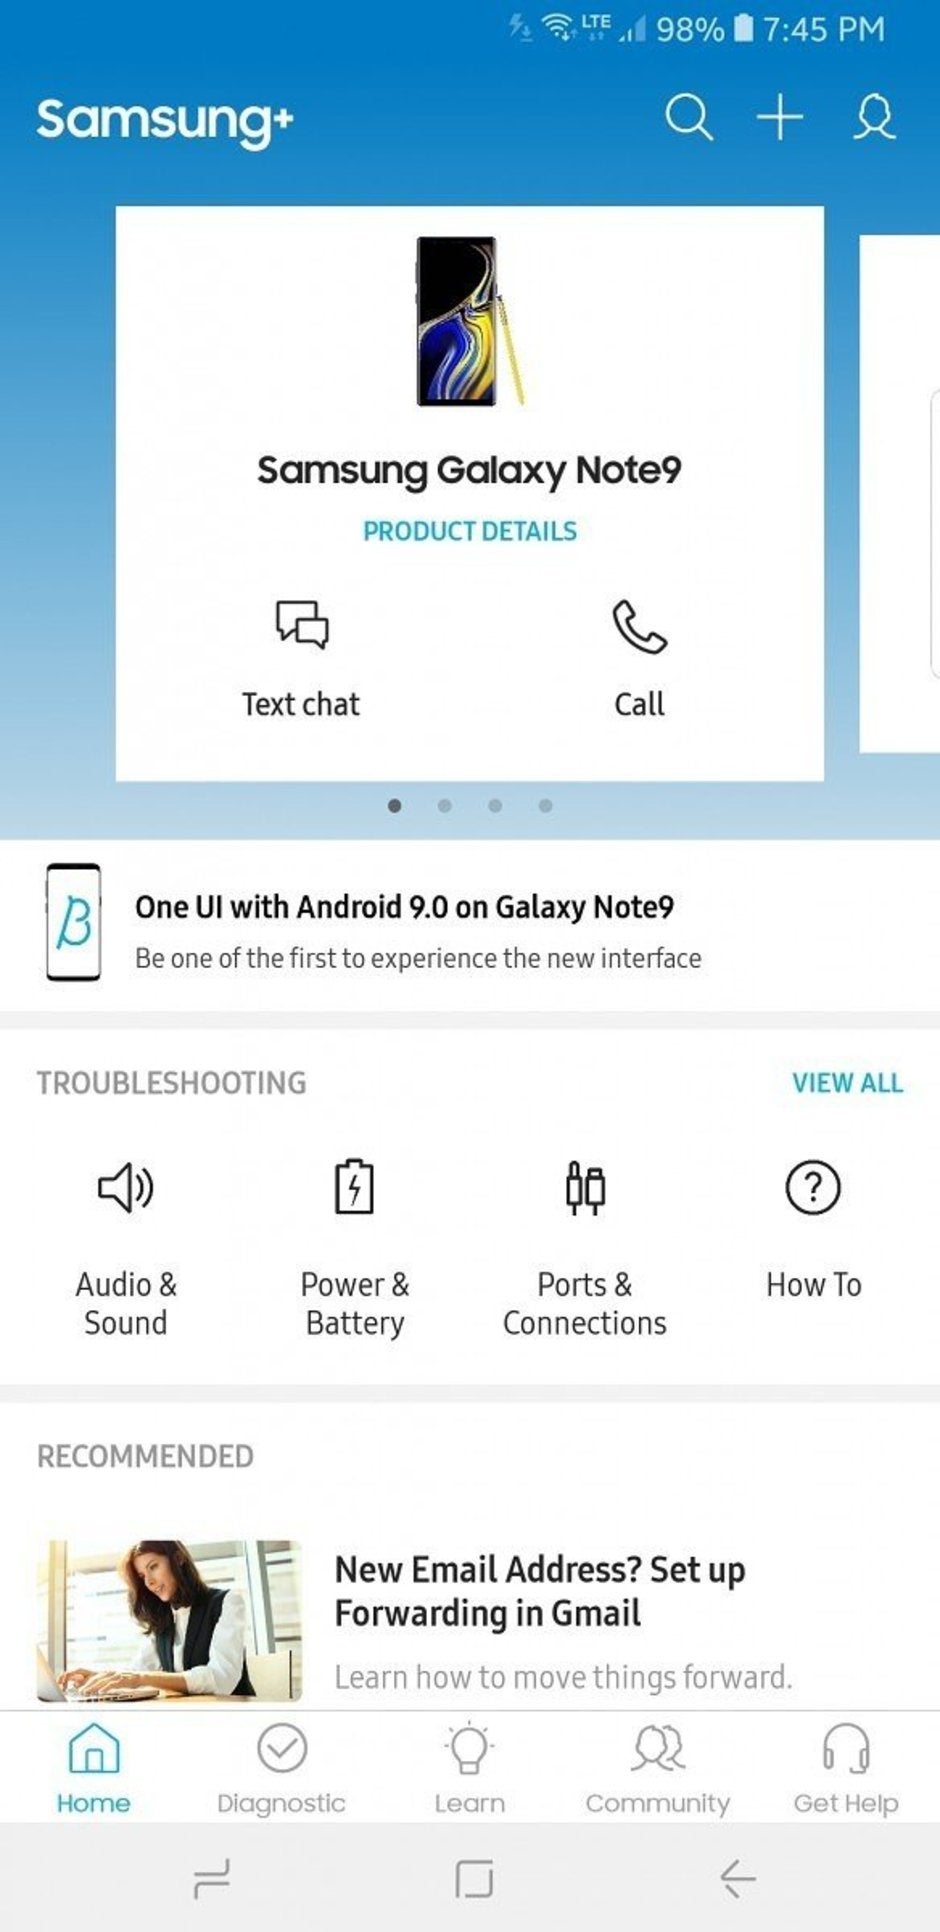 Samsung opens One UI beta program to Galaxy Note 9 users in the U.S.